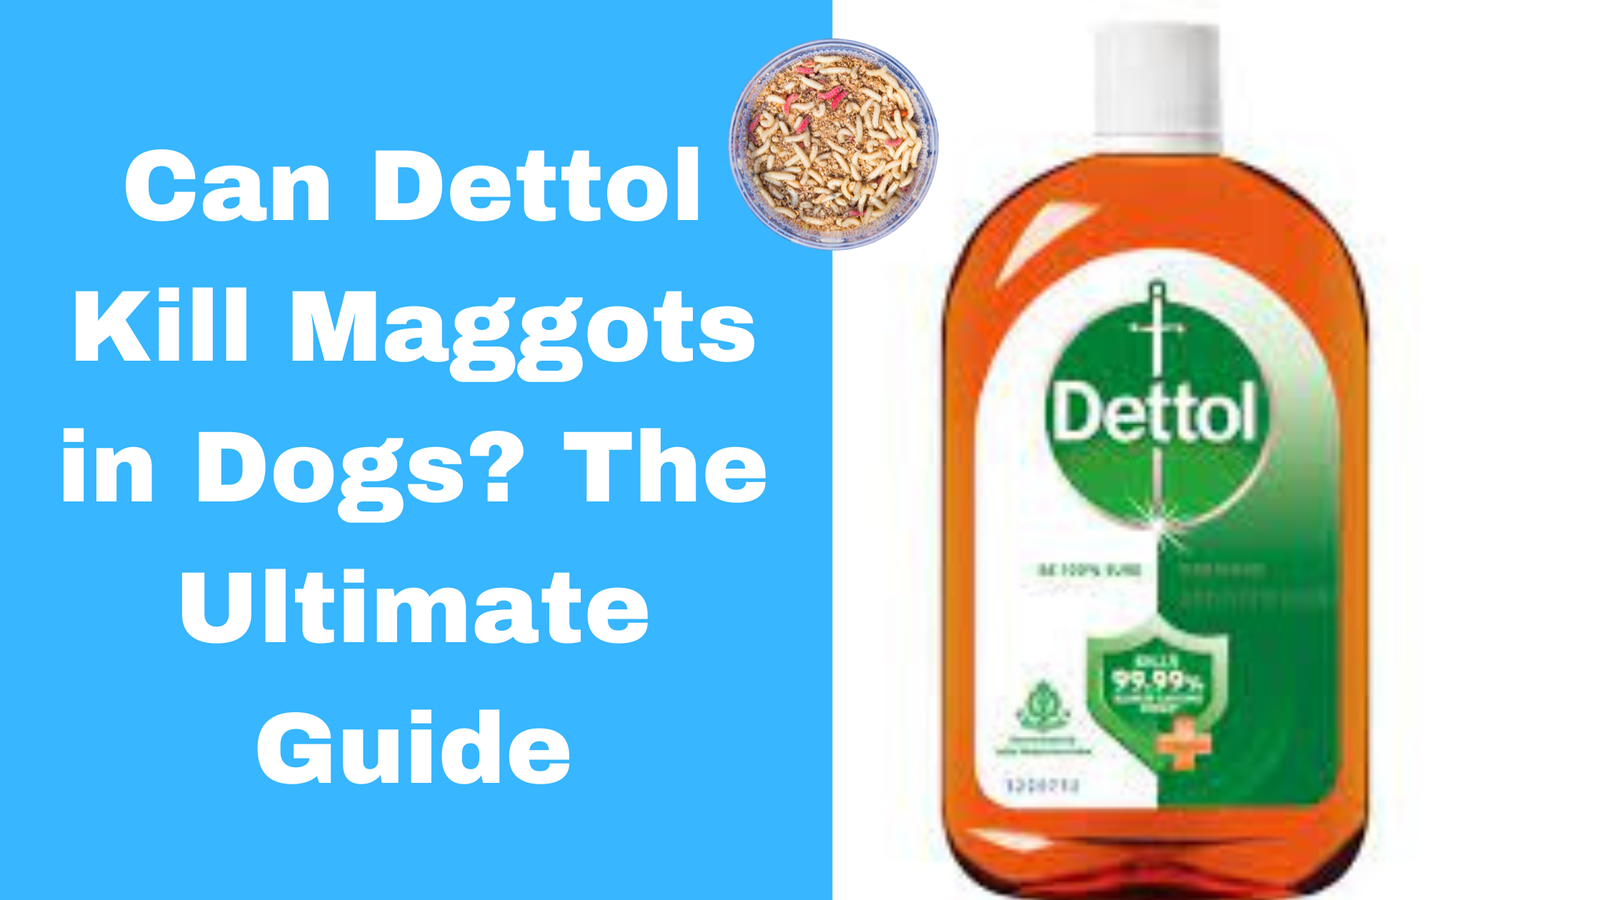 Can Dettol Kill Maggots in Dogs